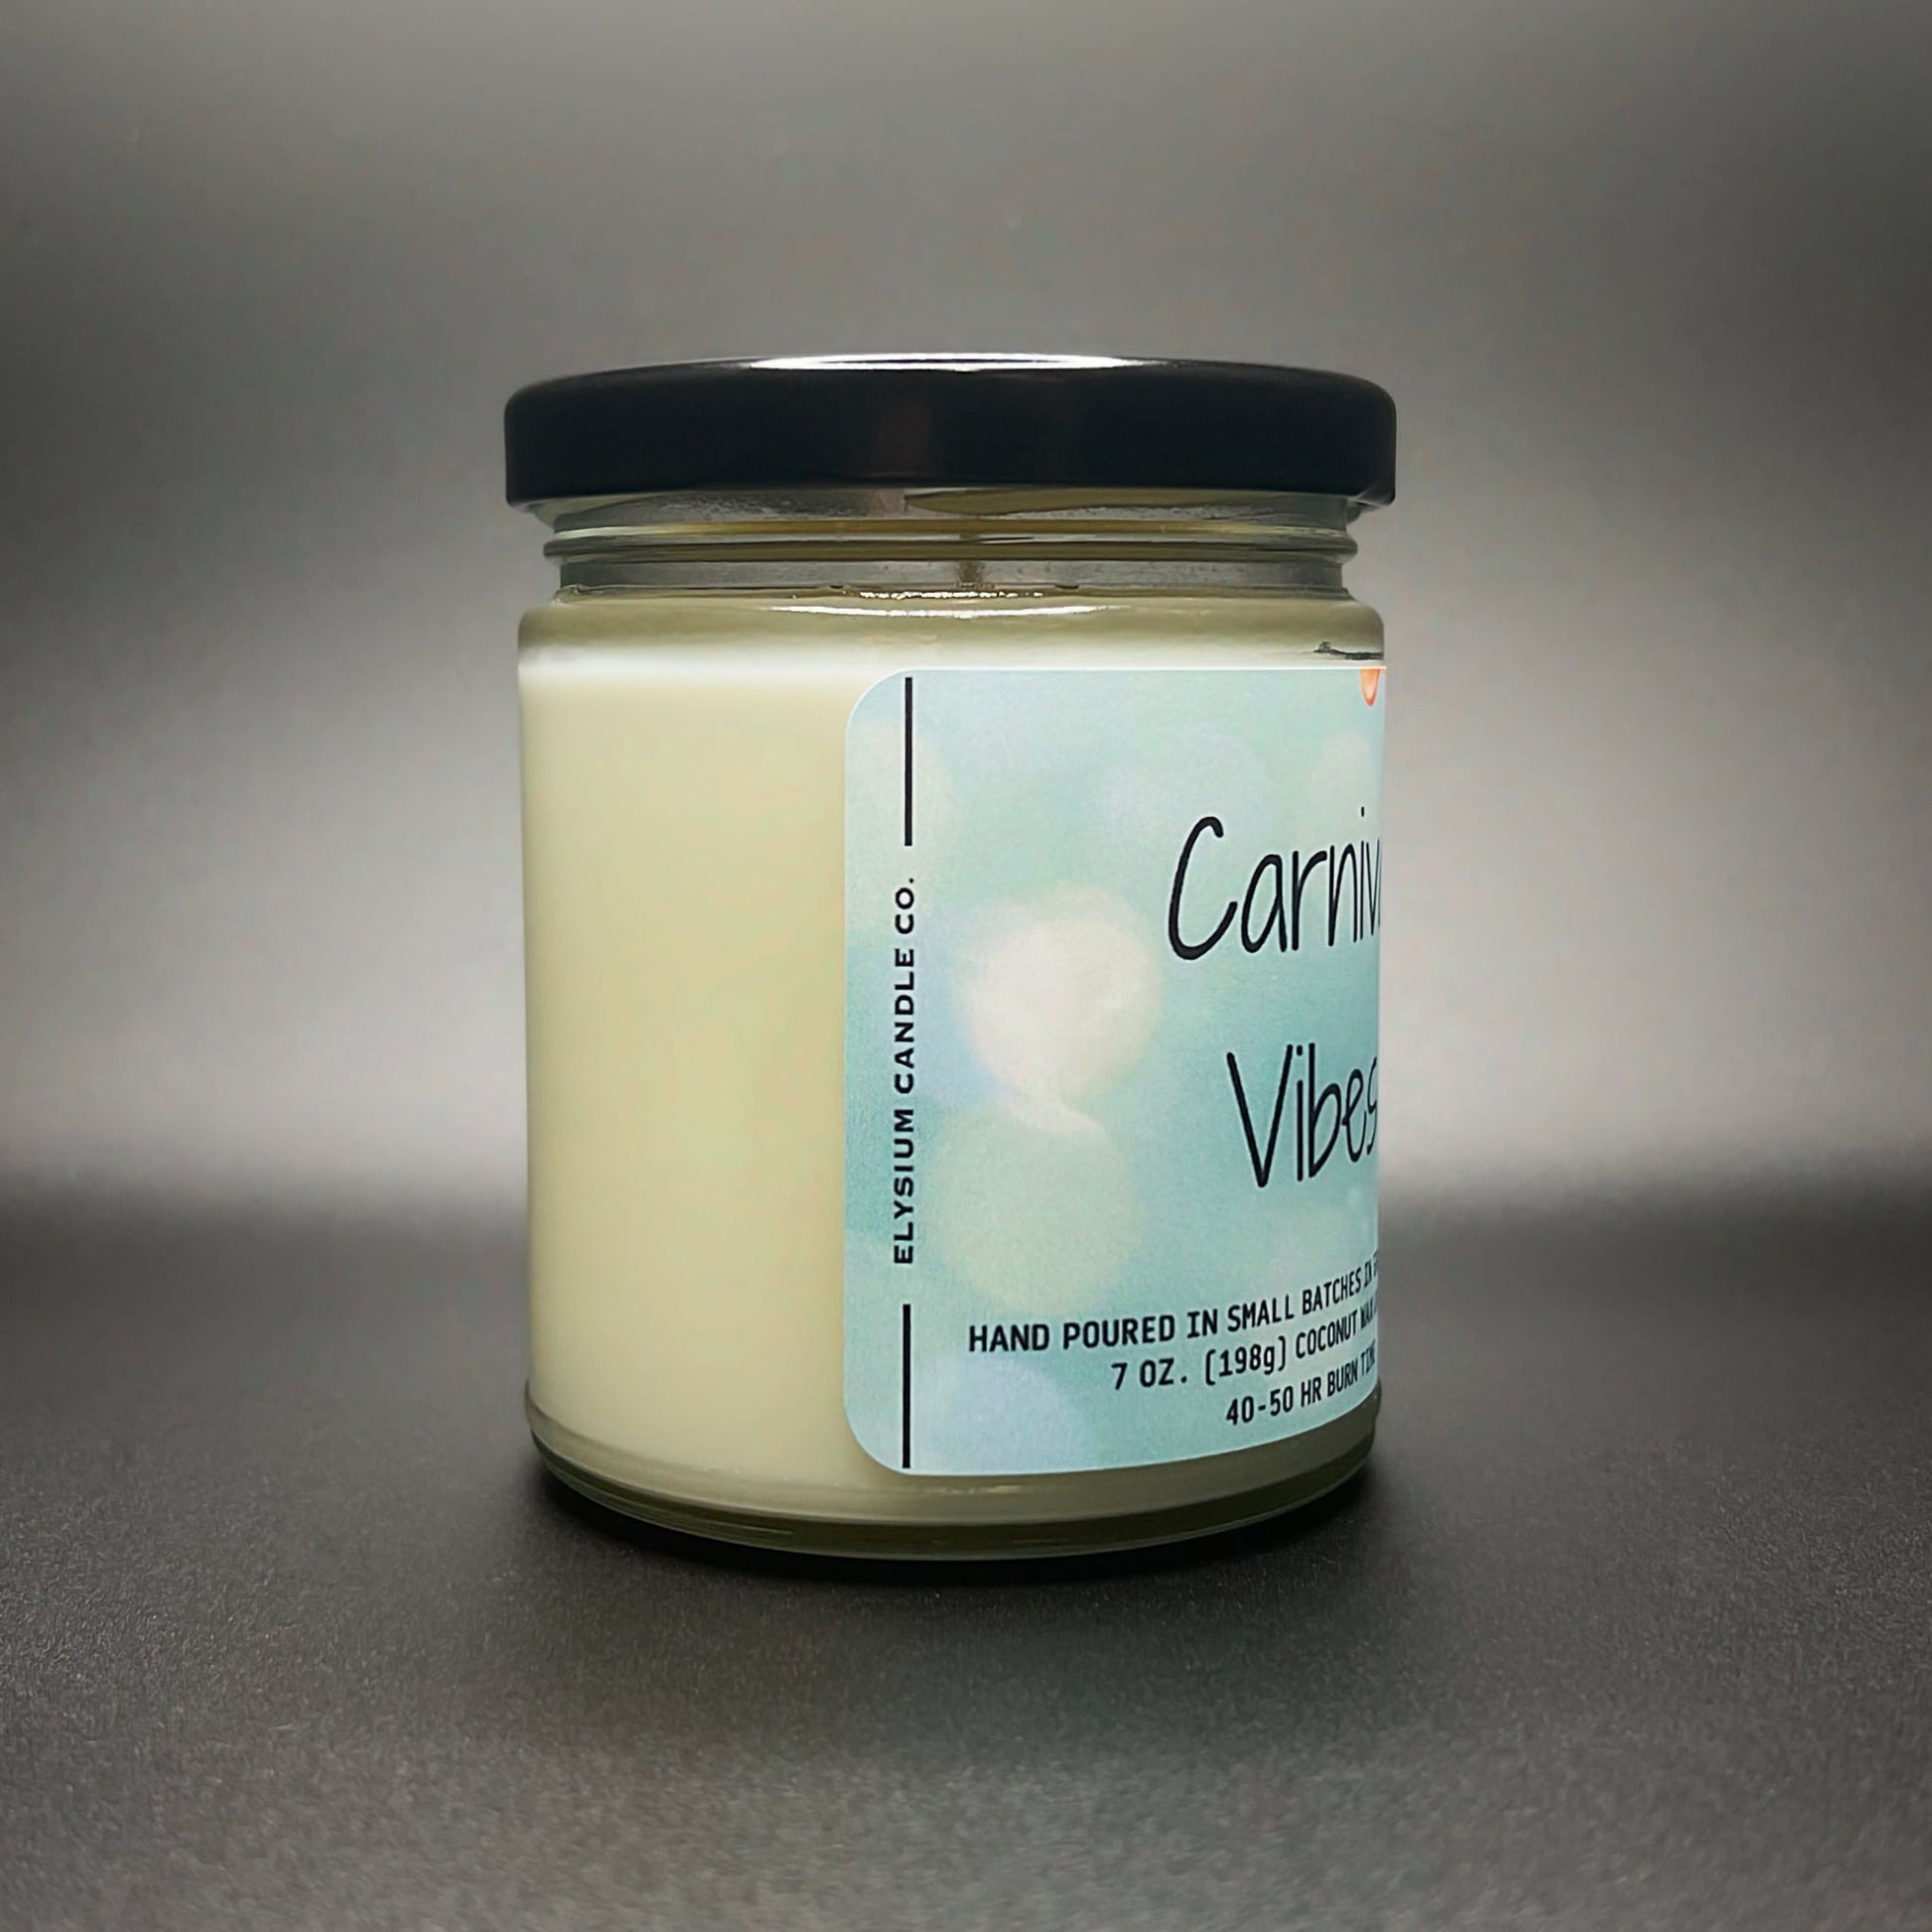 Carnival Vibes coconut soy blend wax candle in glass jar with label.